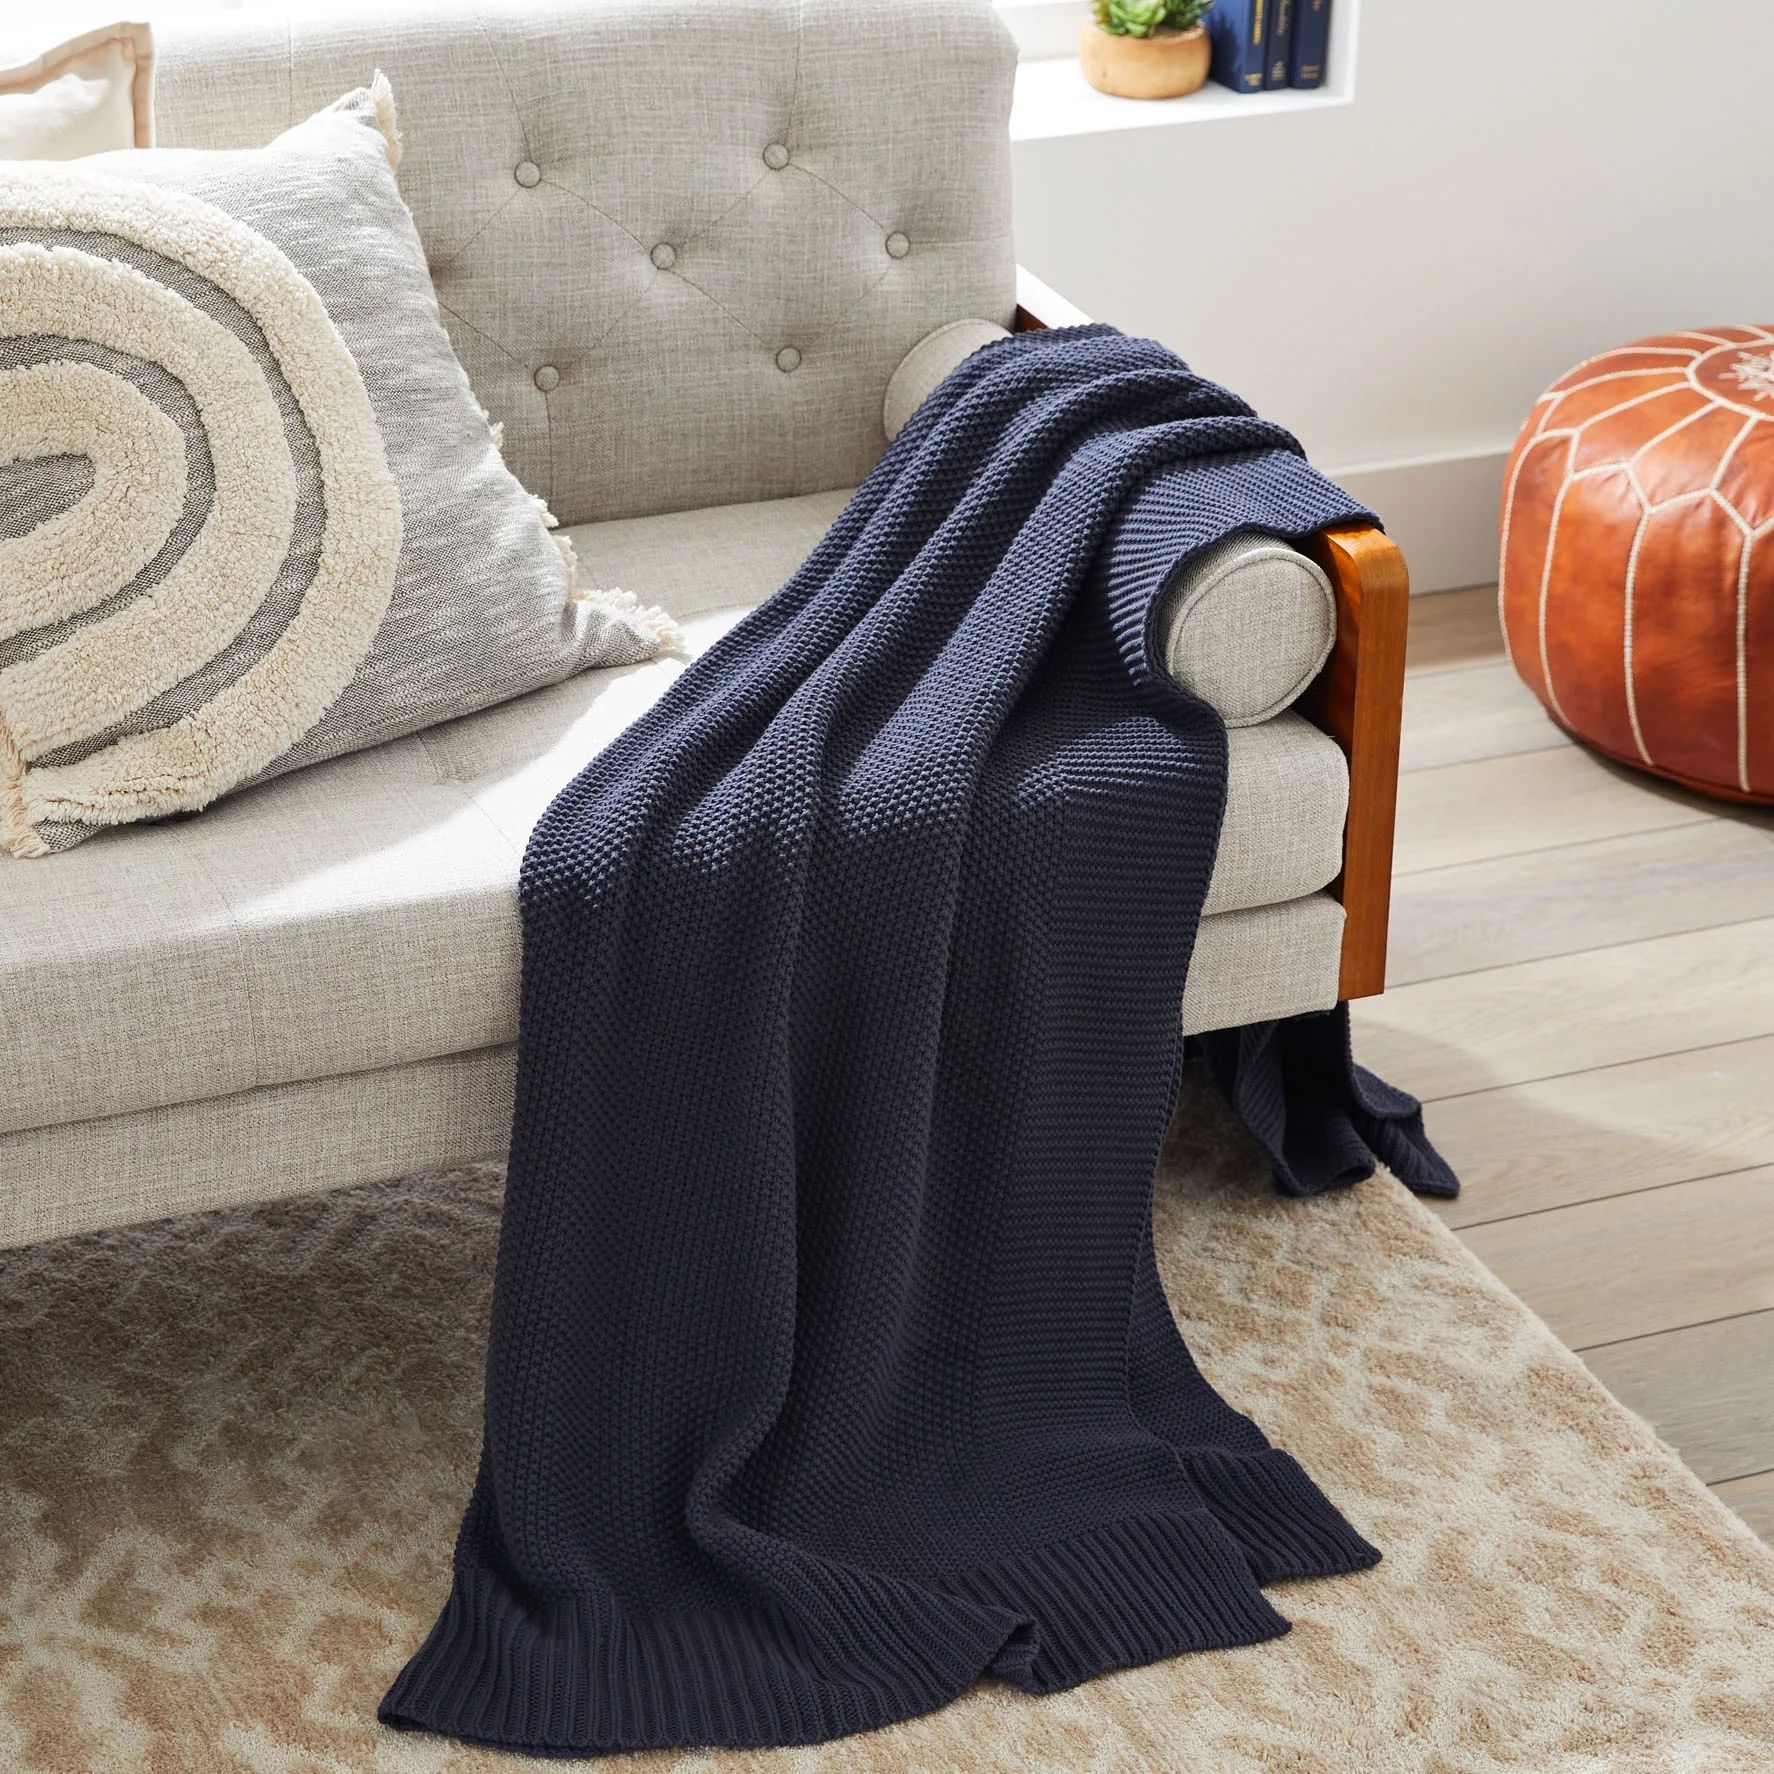 Better Homes & Gardens Solid Knit Throw, Charcoal Gray, 50" x 60" | Walmart (US)